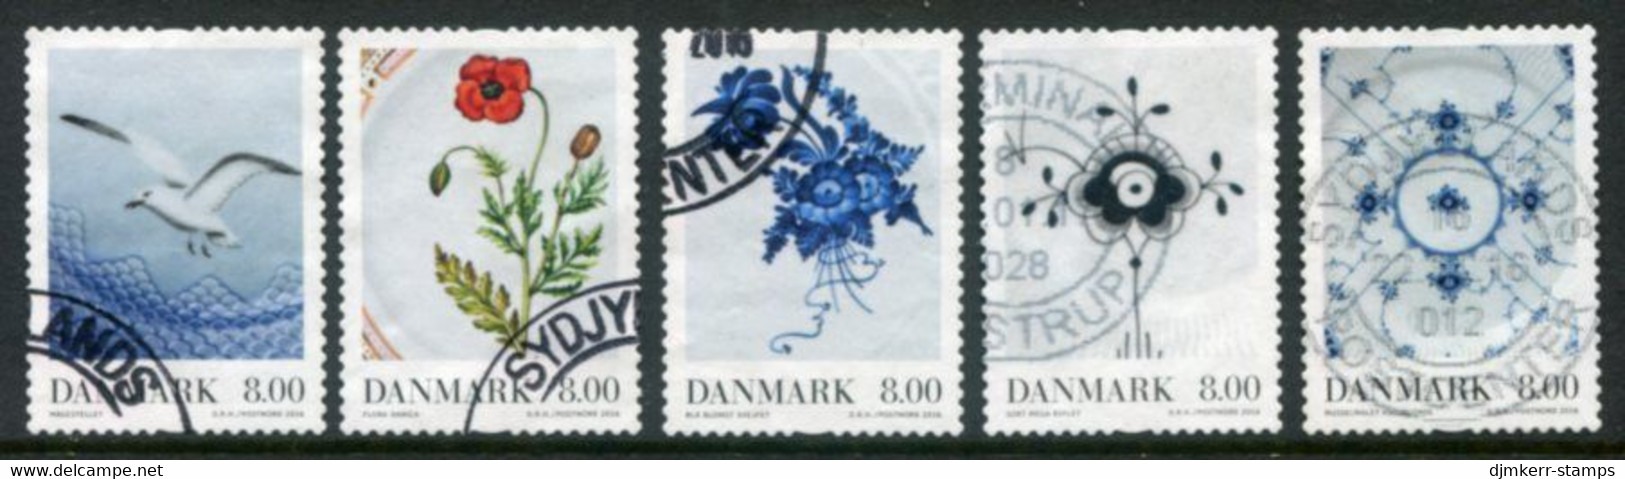 DENMARK 2016 Porcelain Self-adhesive Used.  Michel 1894-98 - Used Stamps